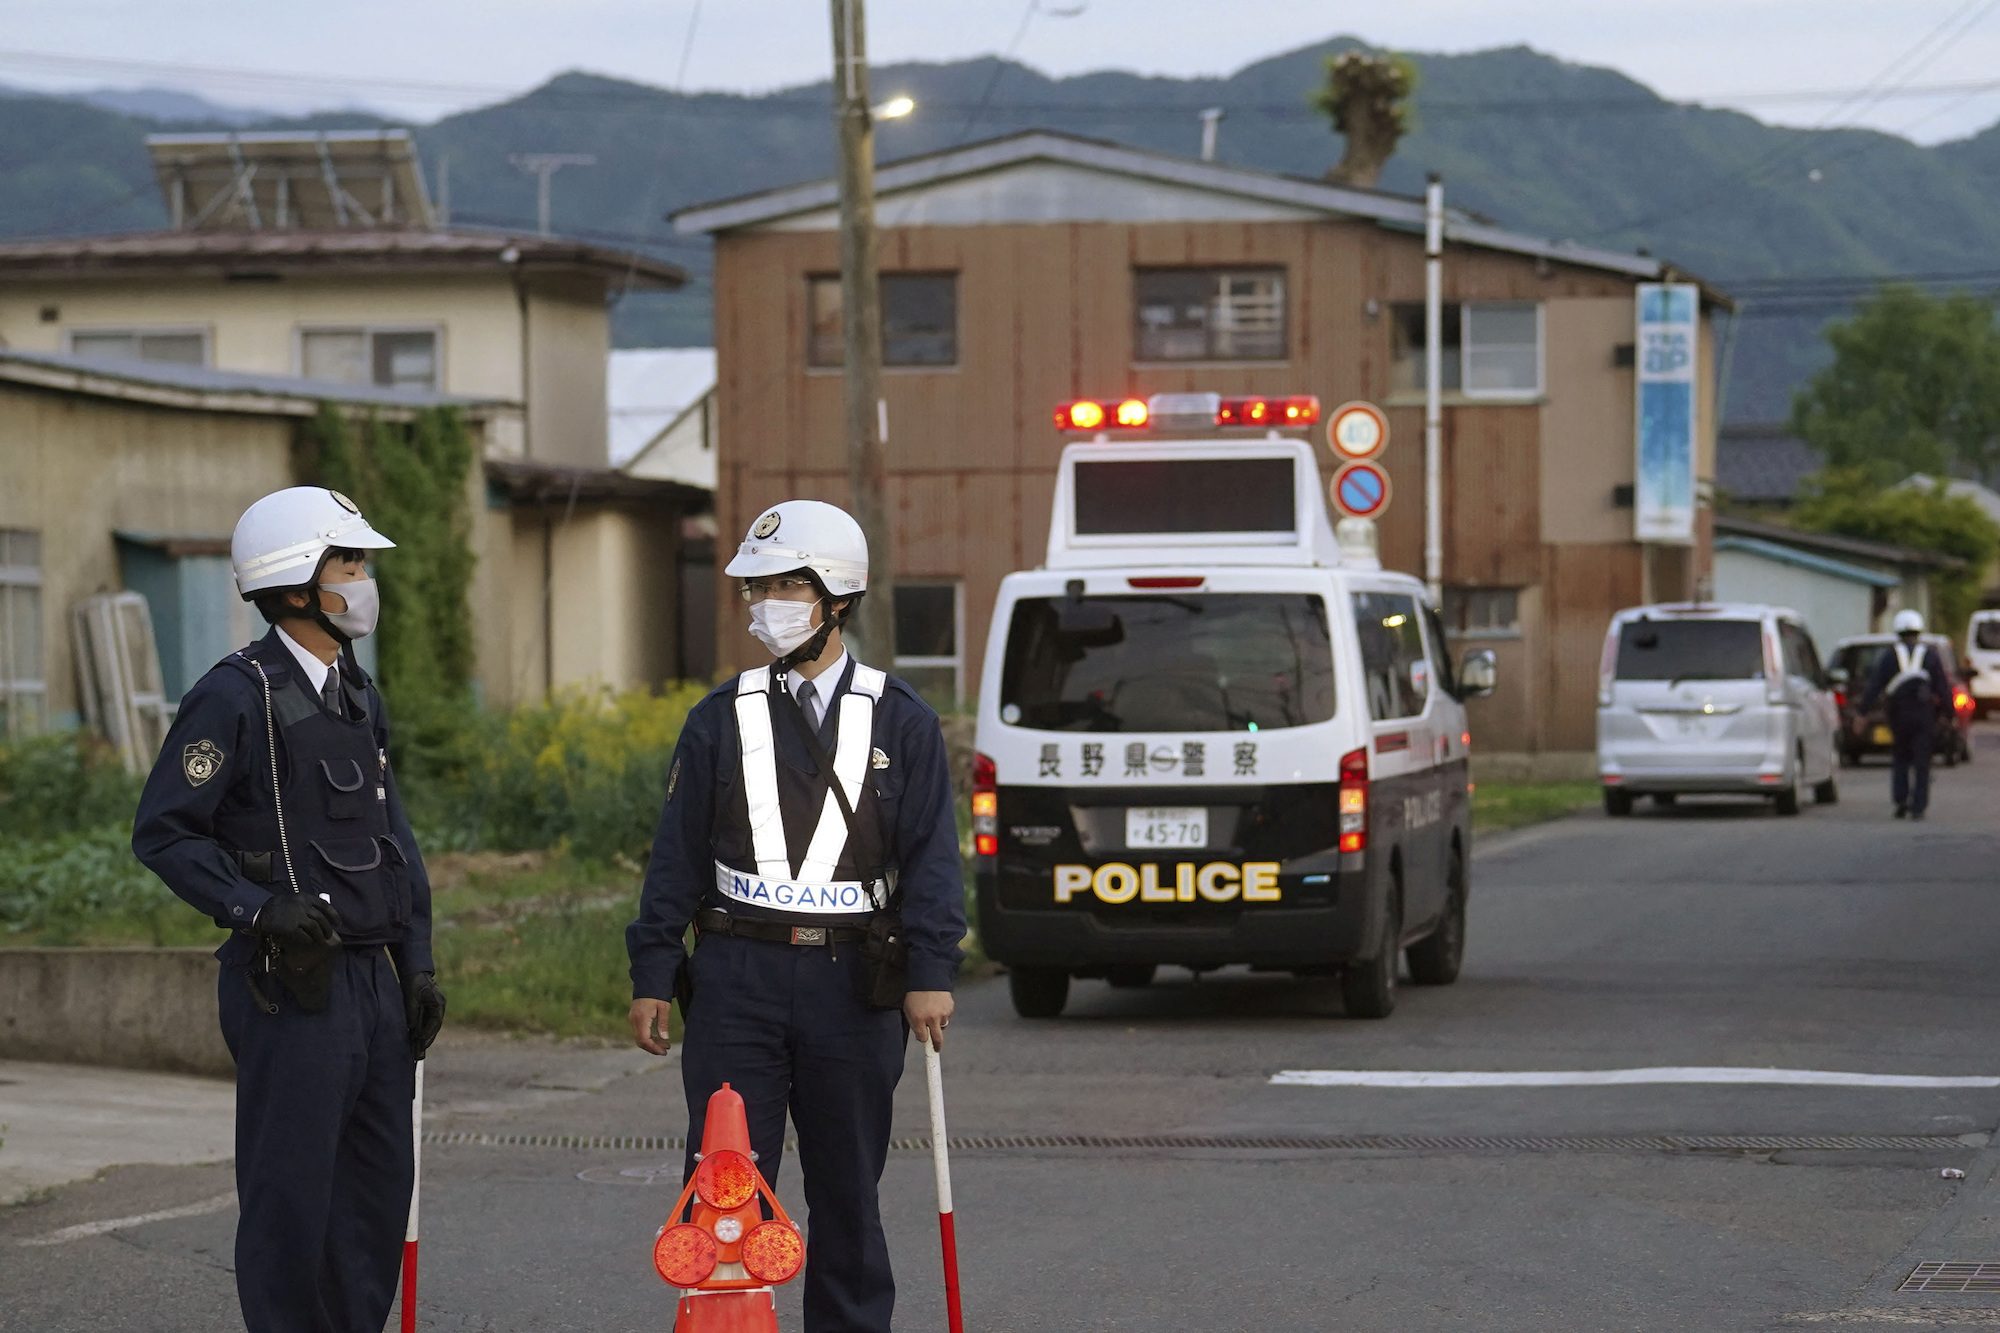 4 dead, suspect arrested in rare shooting incident in Japan